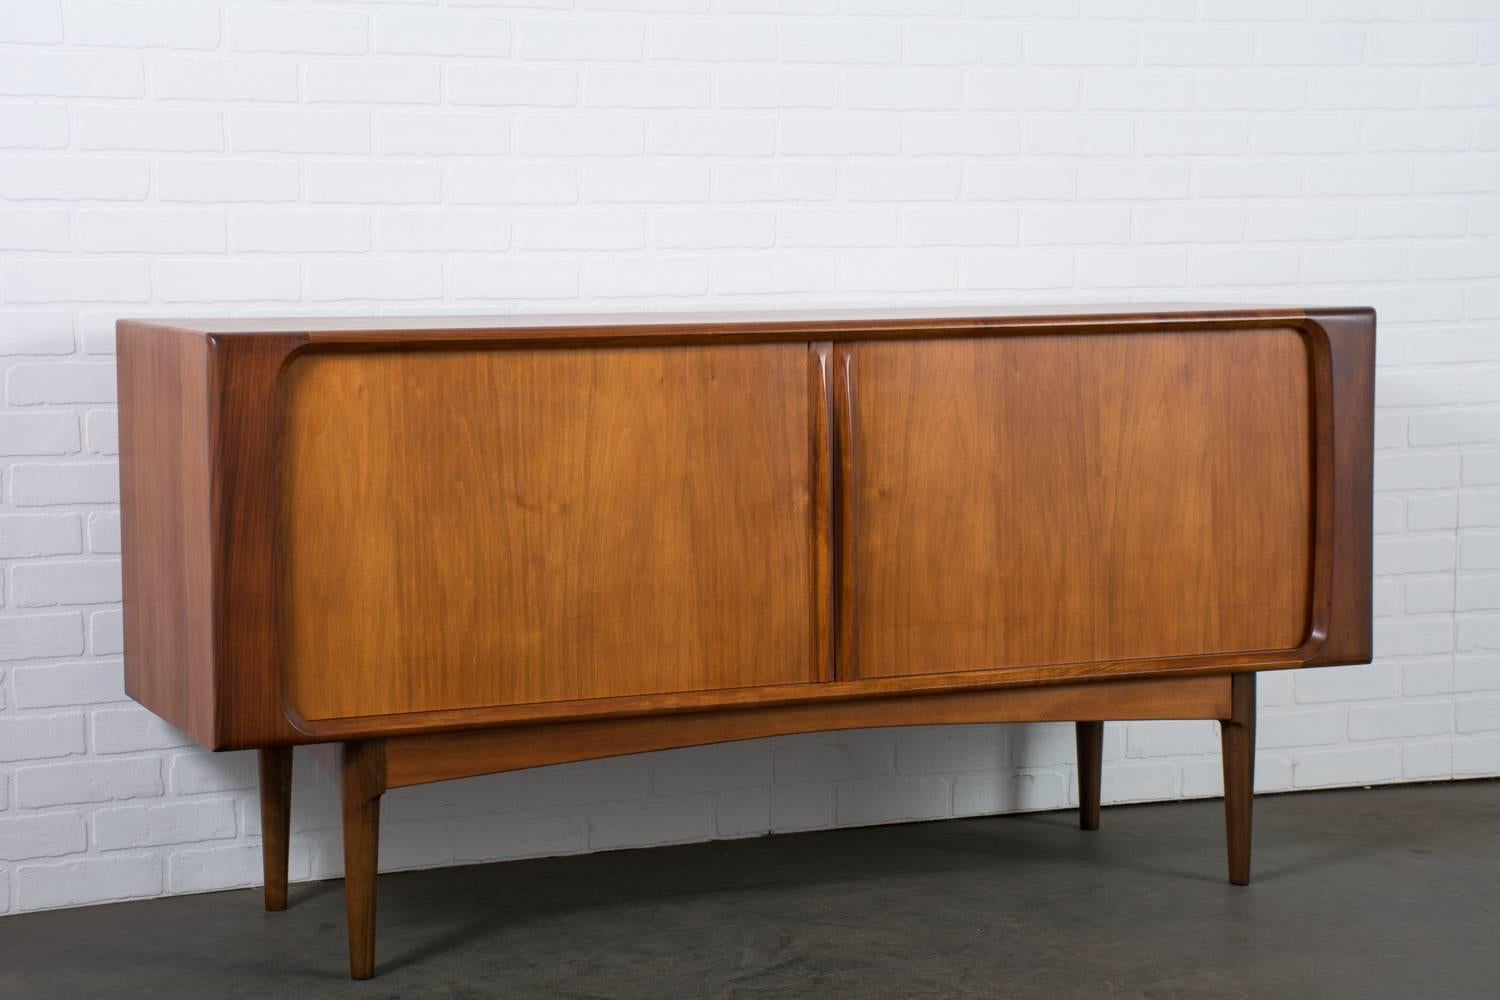 This Danish Modern teak credenza is by Bernard Pedersen & Son, circa 1960s. This sideboard features tambour doors that slide smoothly to reveal three slim tray drawers and three adjustable shelves.